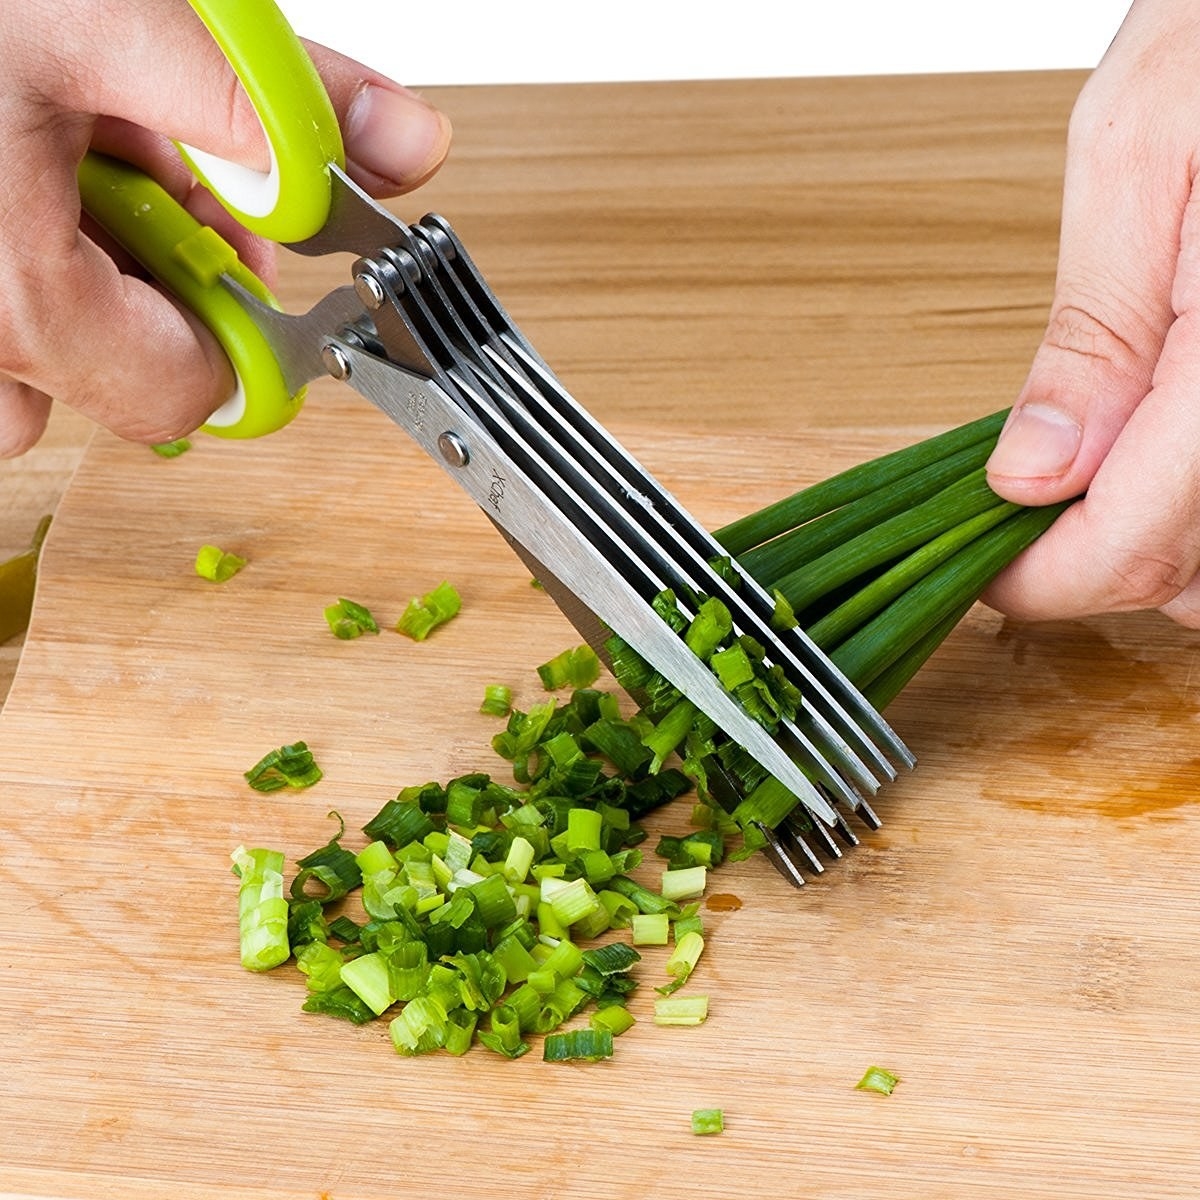 person chopping green onions with special scissors that have multiple blades